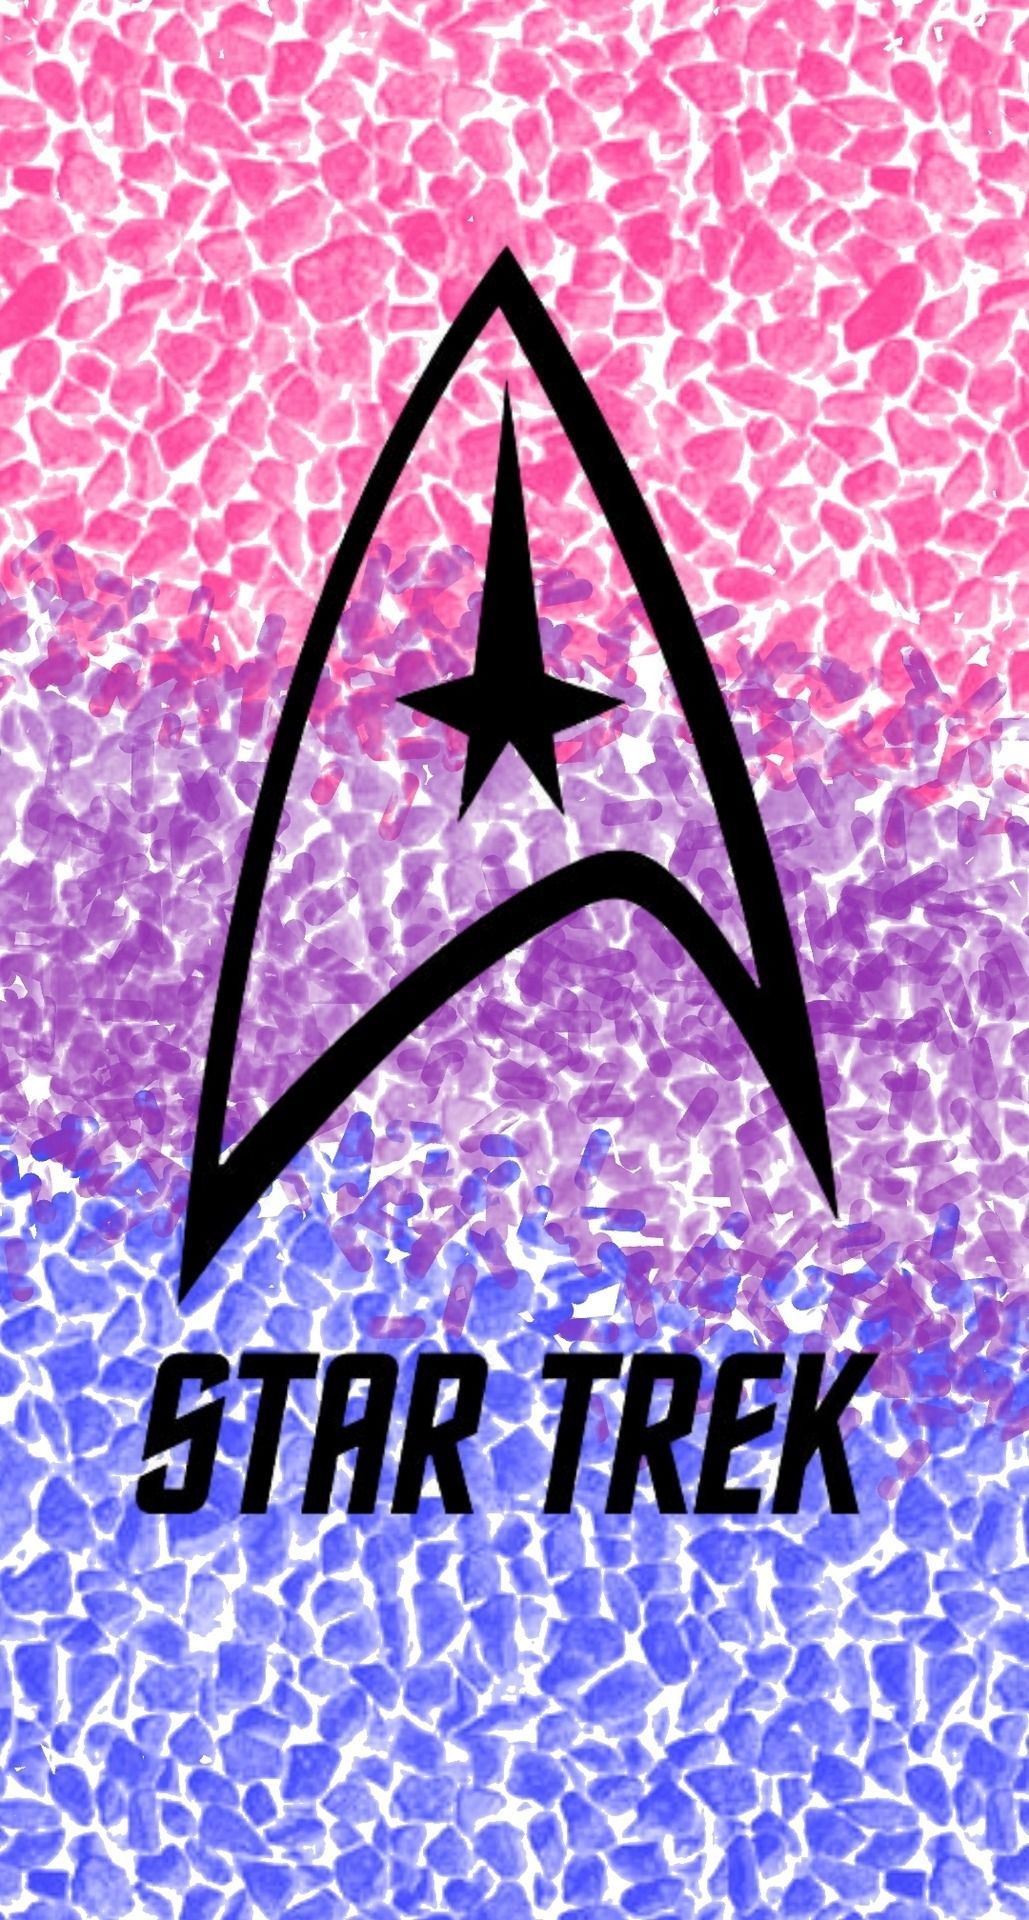 A cell phone wallpaper of the Star Trek logo on a pink and blue background - Star Trek